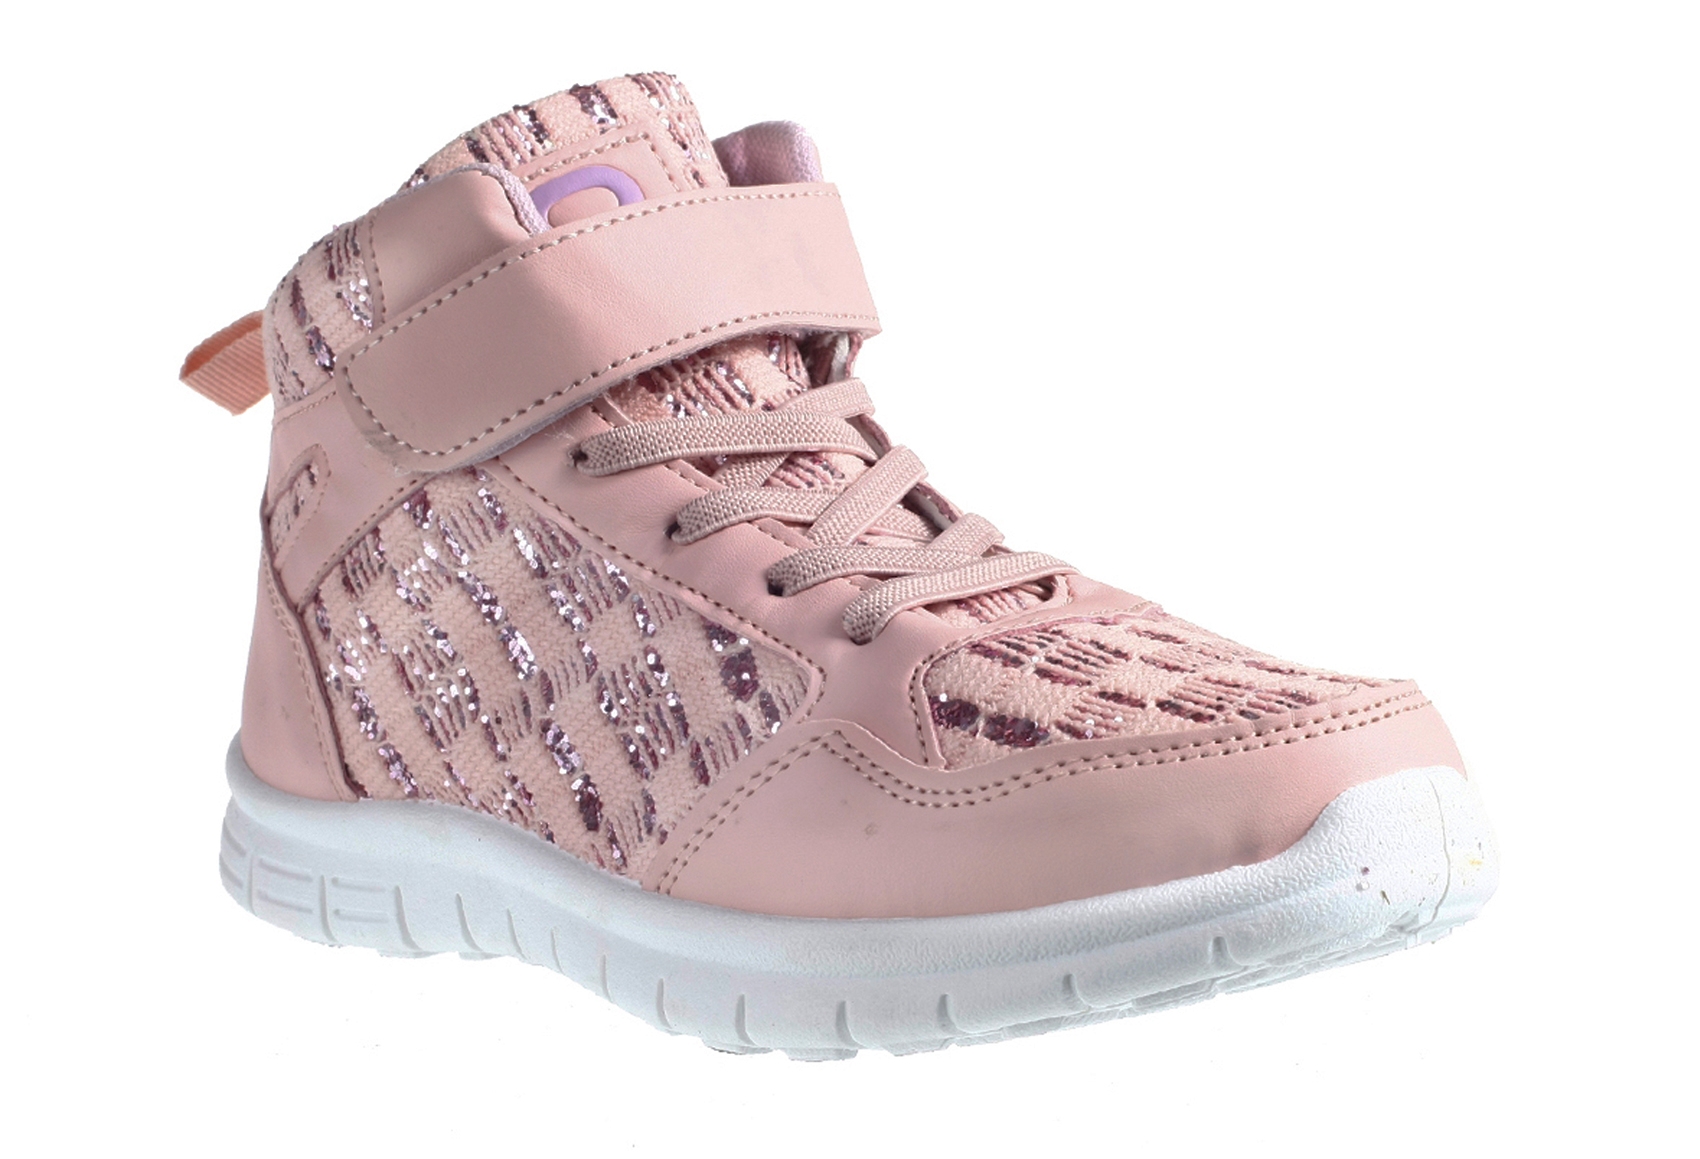 Khadim | Pro By Khadim's Synthetic PVC Sole Decorative Sneakers For Girl